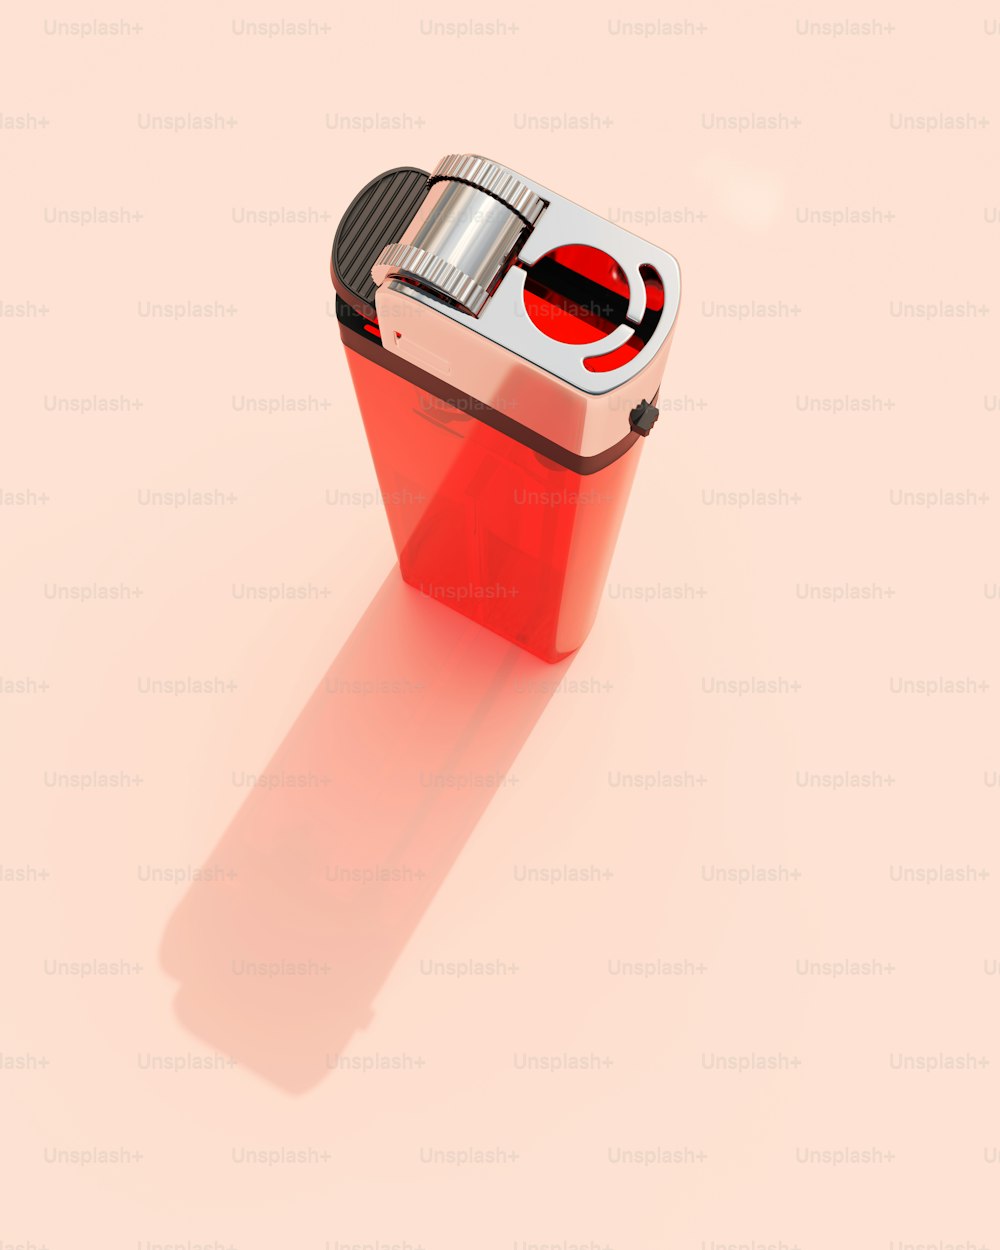 a red lighter with a red circle on top of it